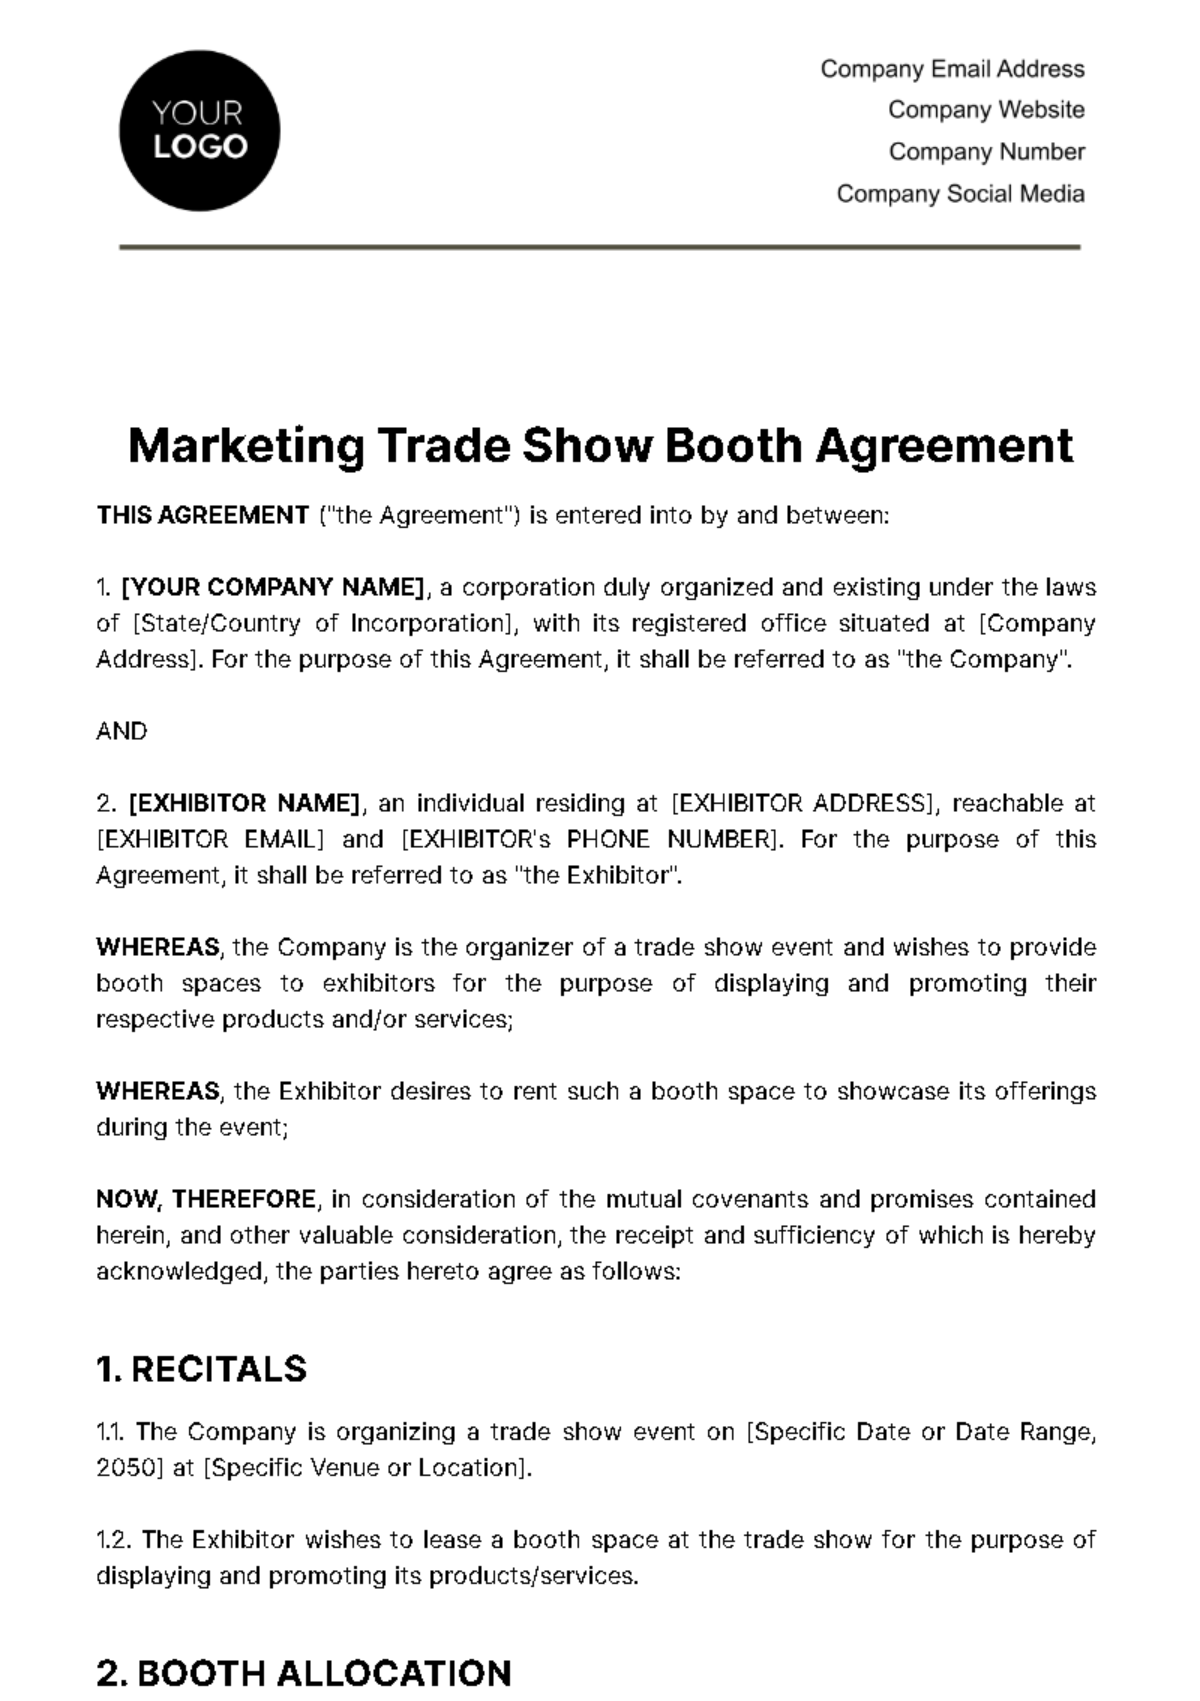 Free Marketing Trade Show Booth Agreement Template